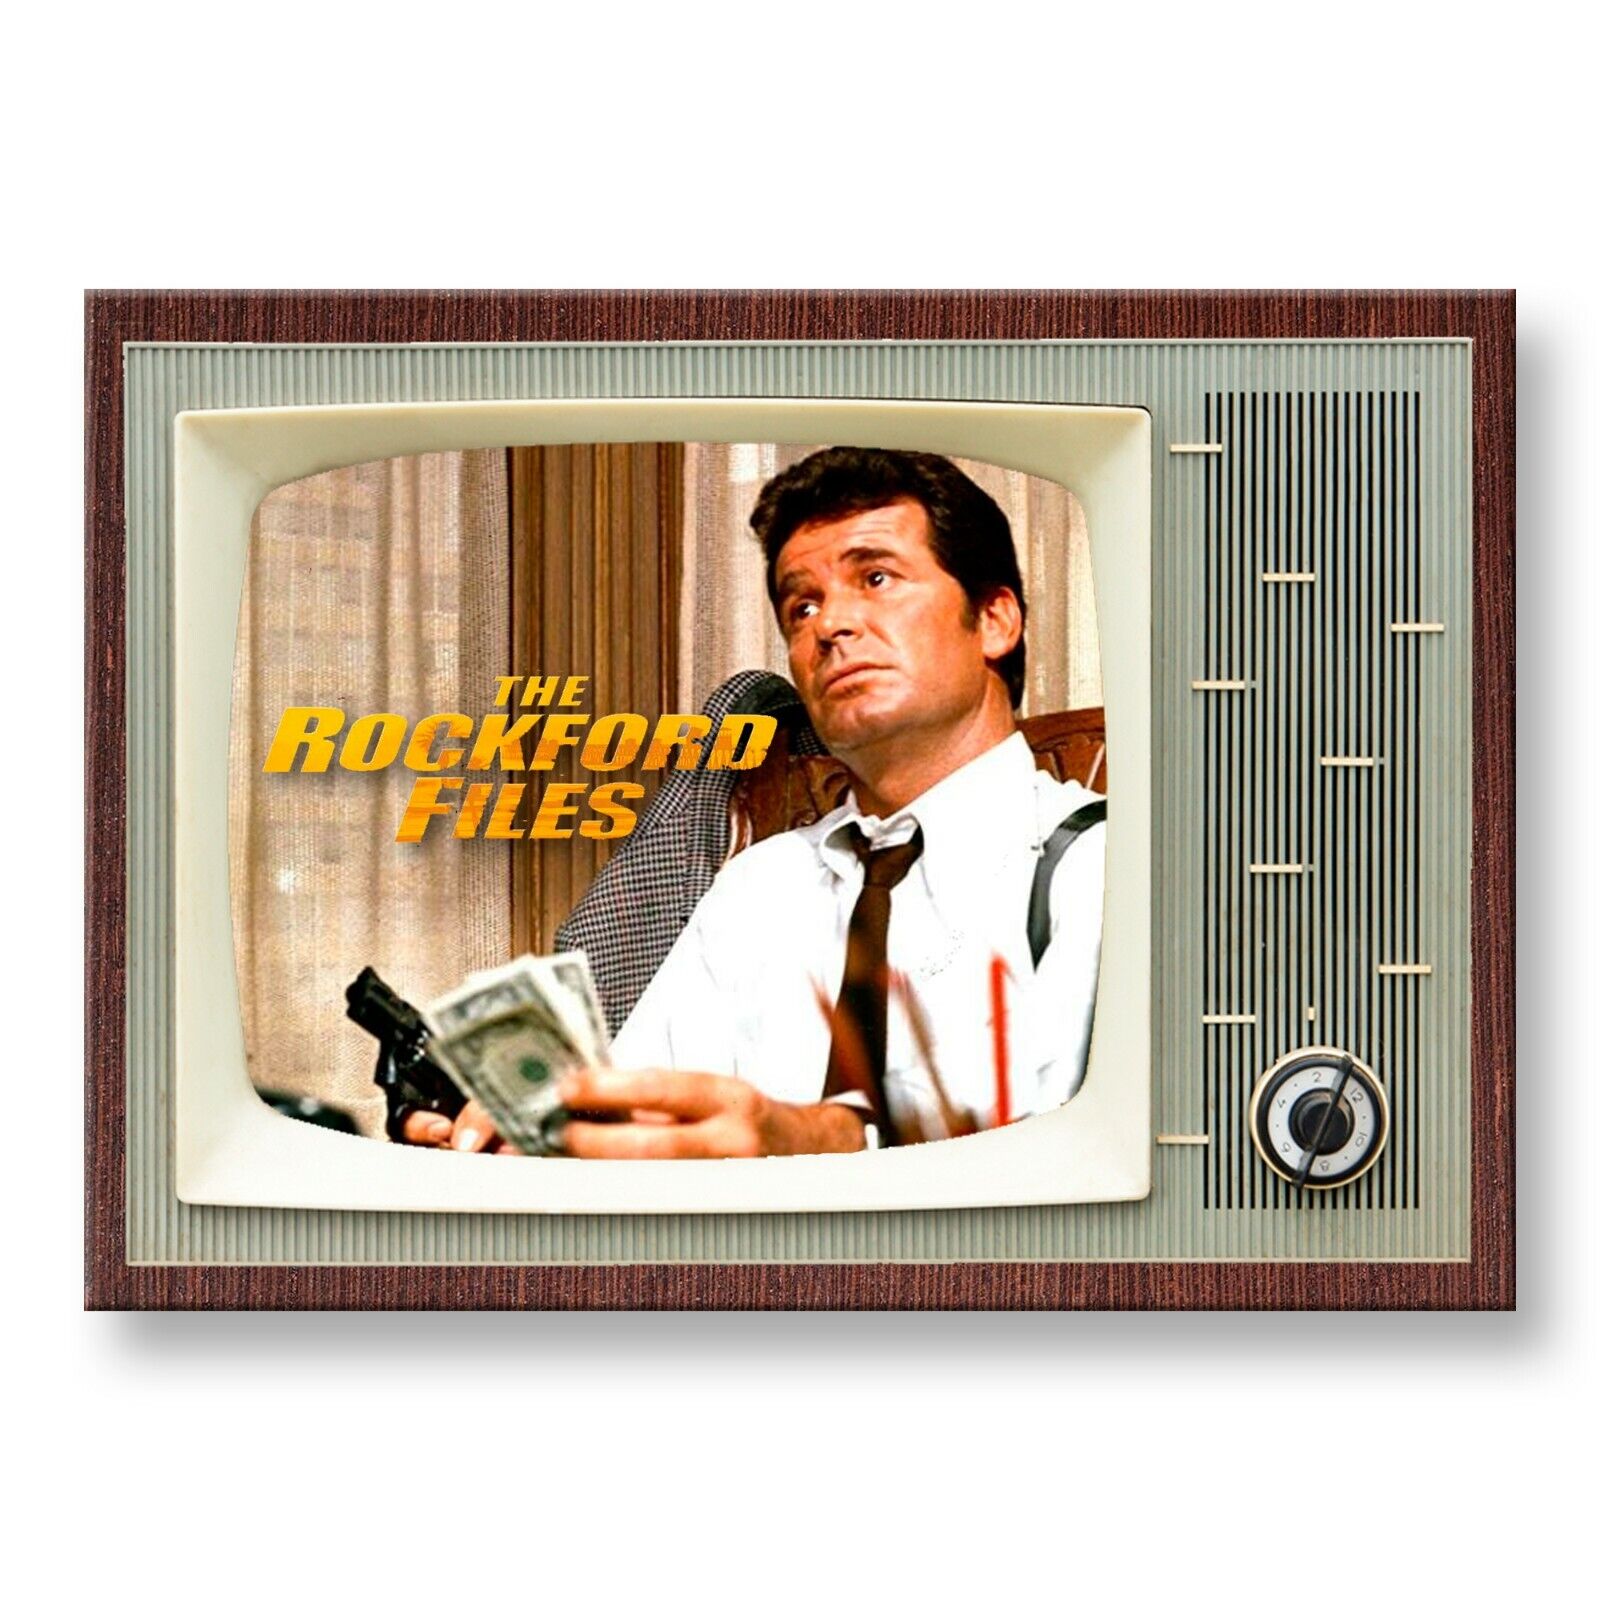 THE ROCKFORD FILES TV Show TV 3.5 inches x 2.5 inches Steel FRIDGE MAGNET